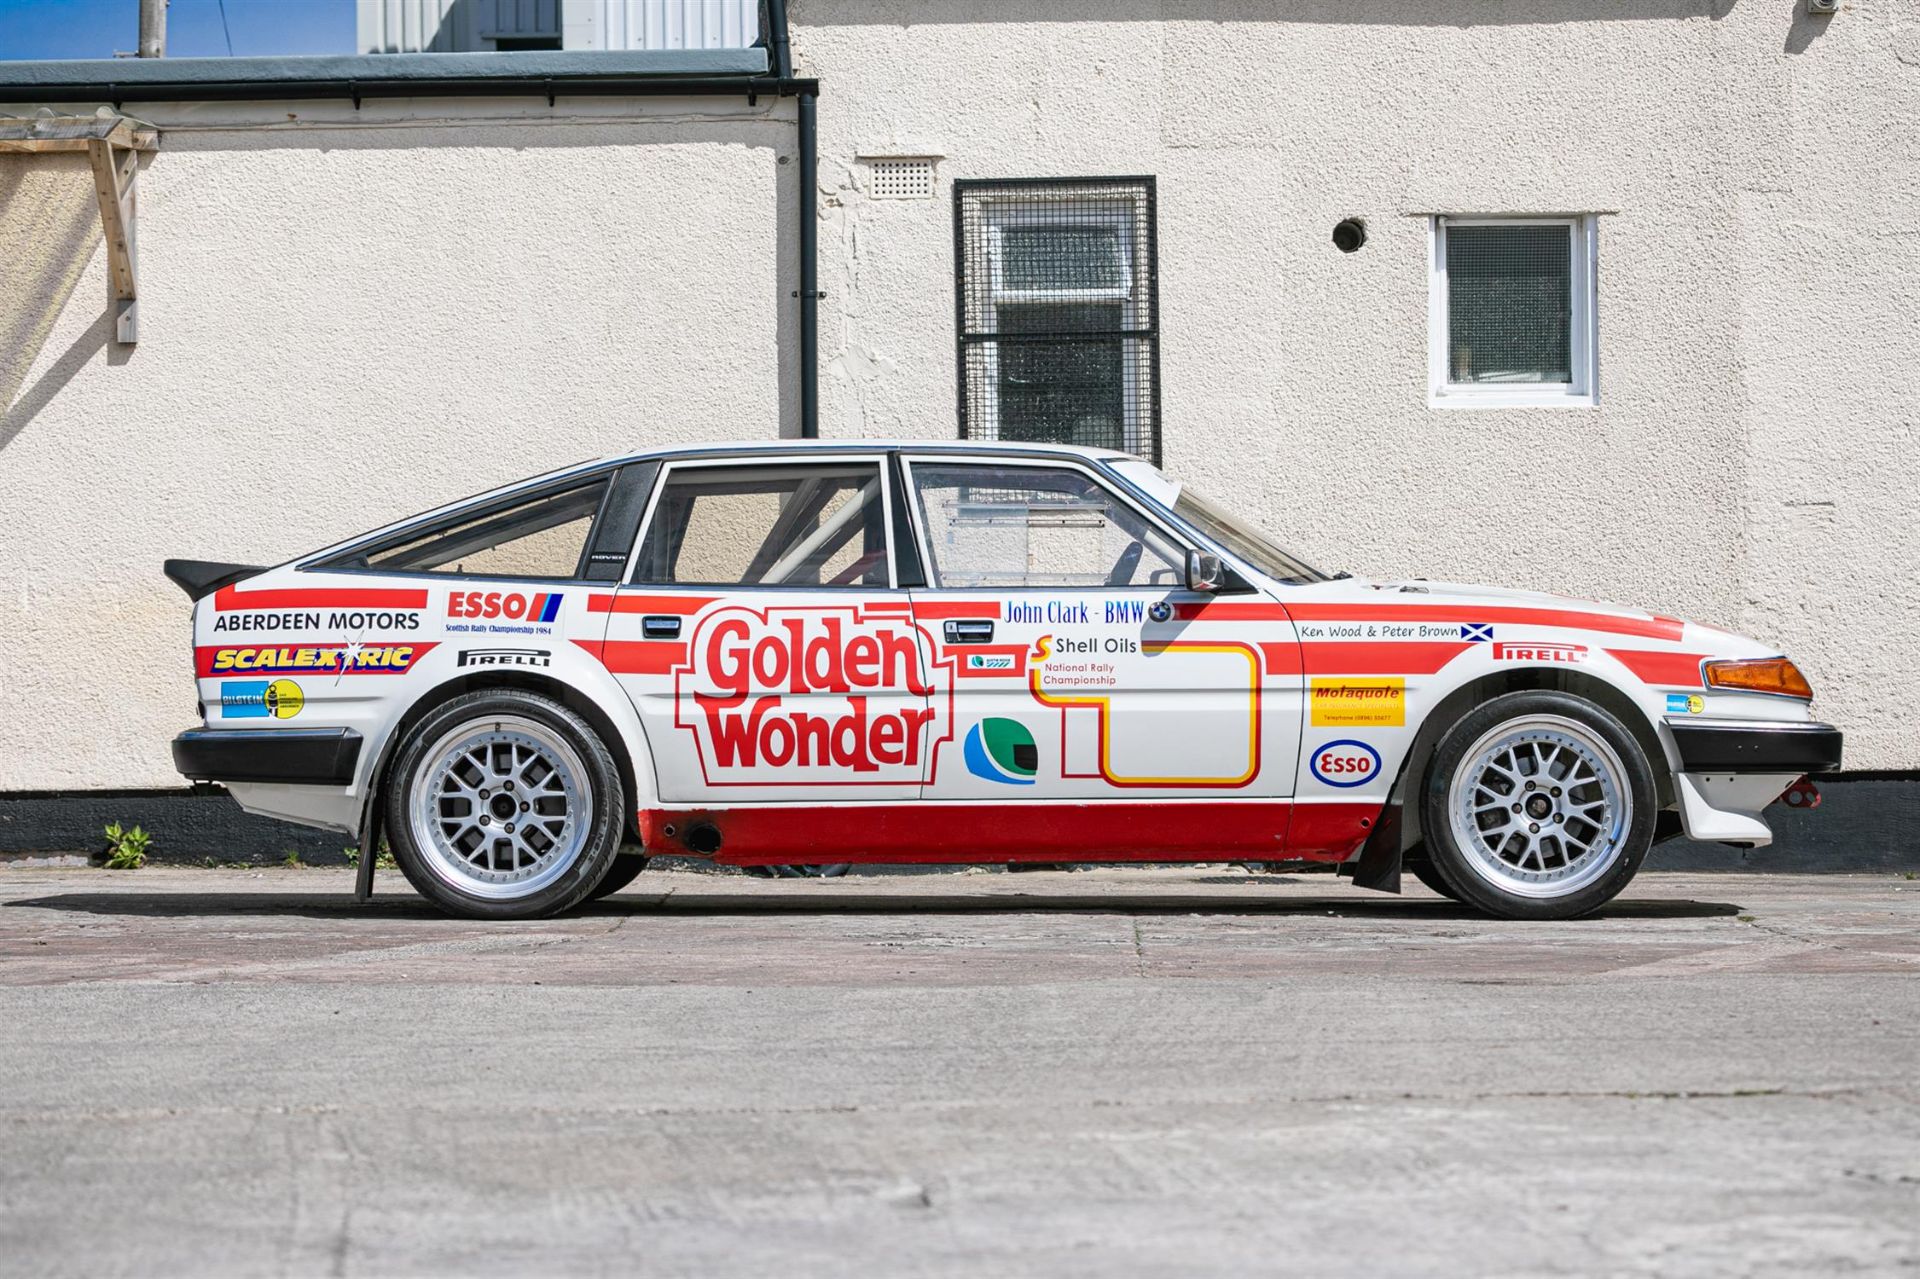 1982 Rover SD1 Vitesse 'Group A' Works Rally Car - Image 5 of 10